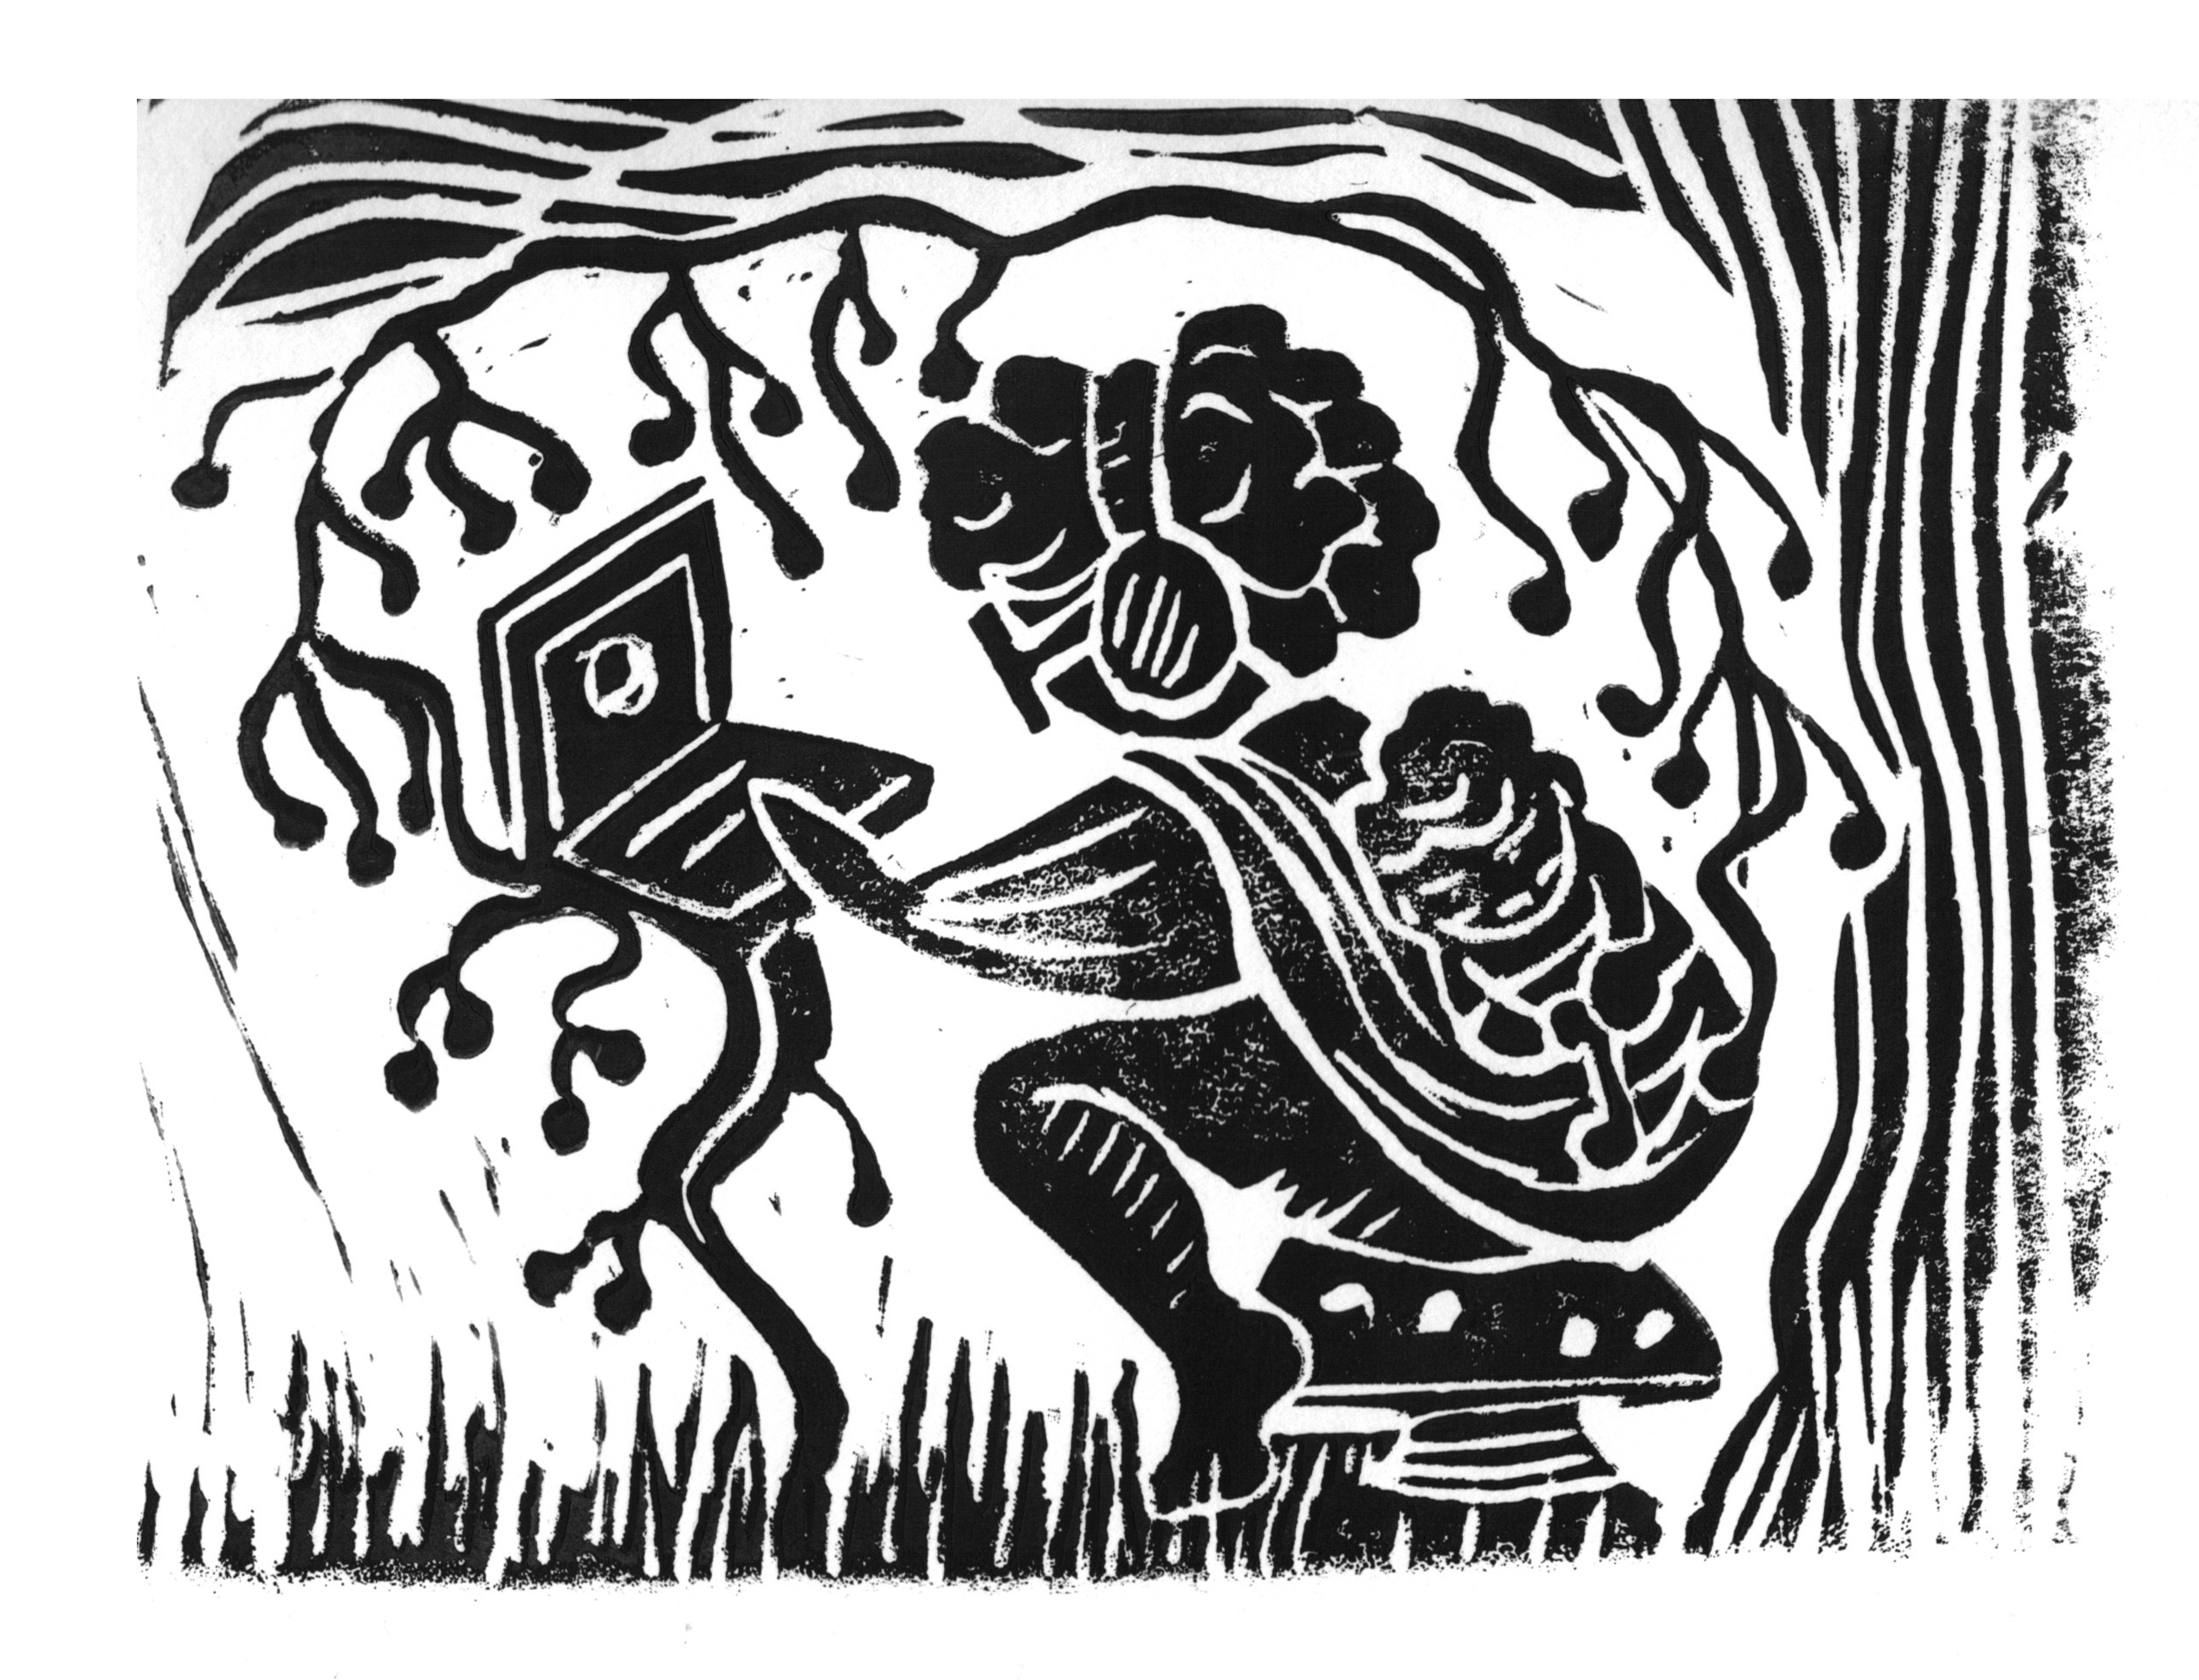 Woodcut image of a young woman with an infant in a pouch on her back. The woman is sitting on a toadstool, using a laptop that is set in a vine next to her.